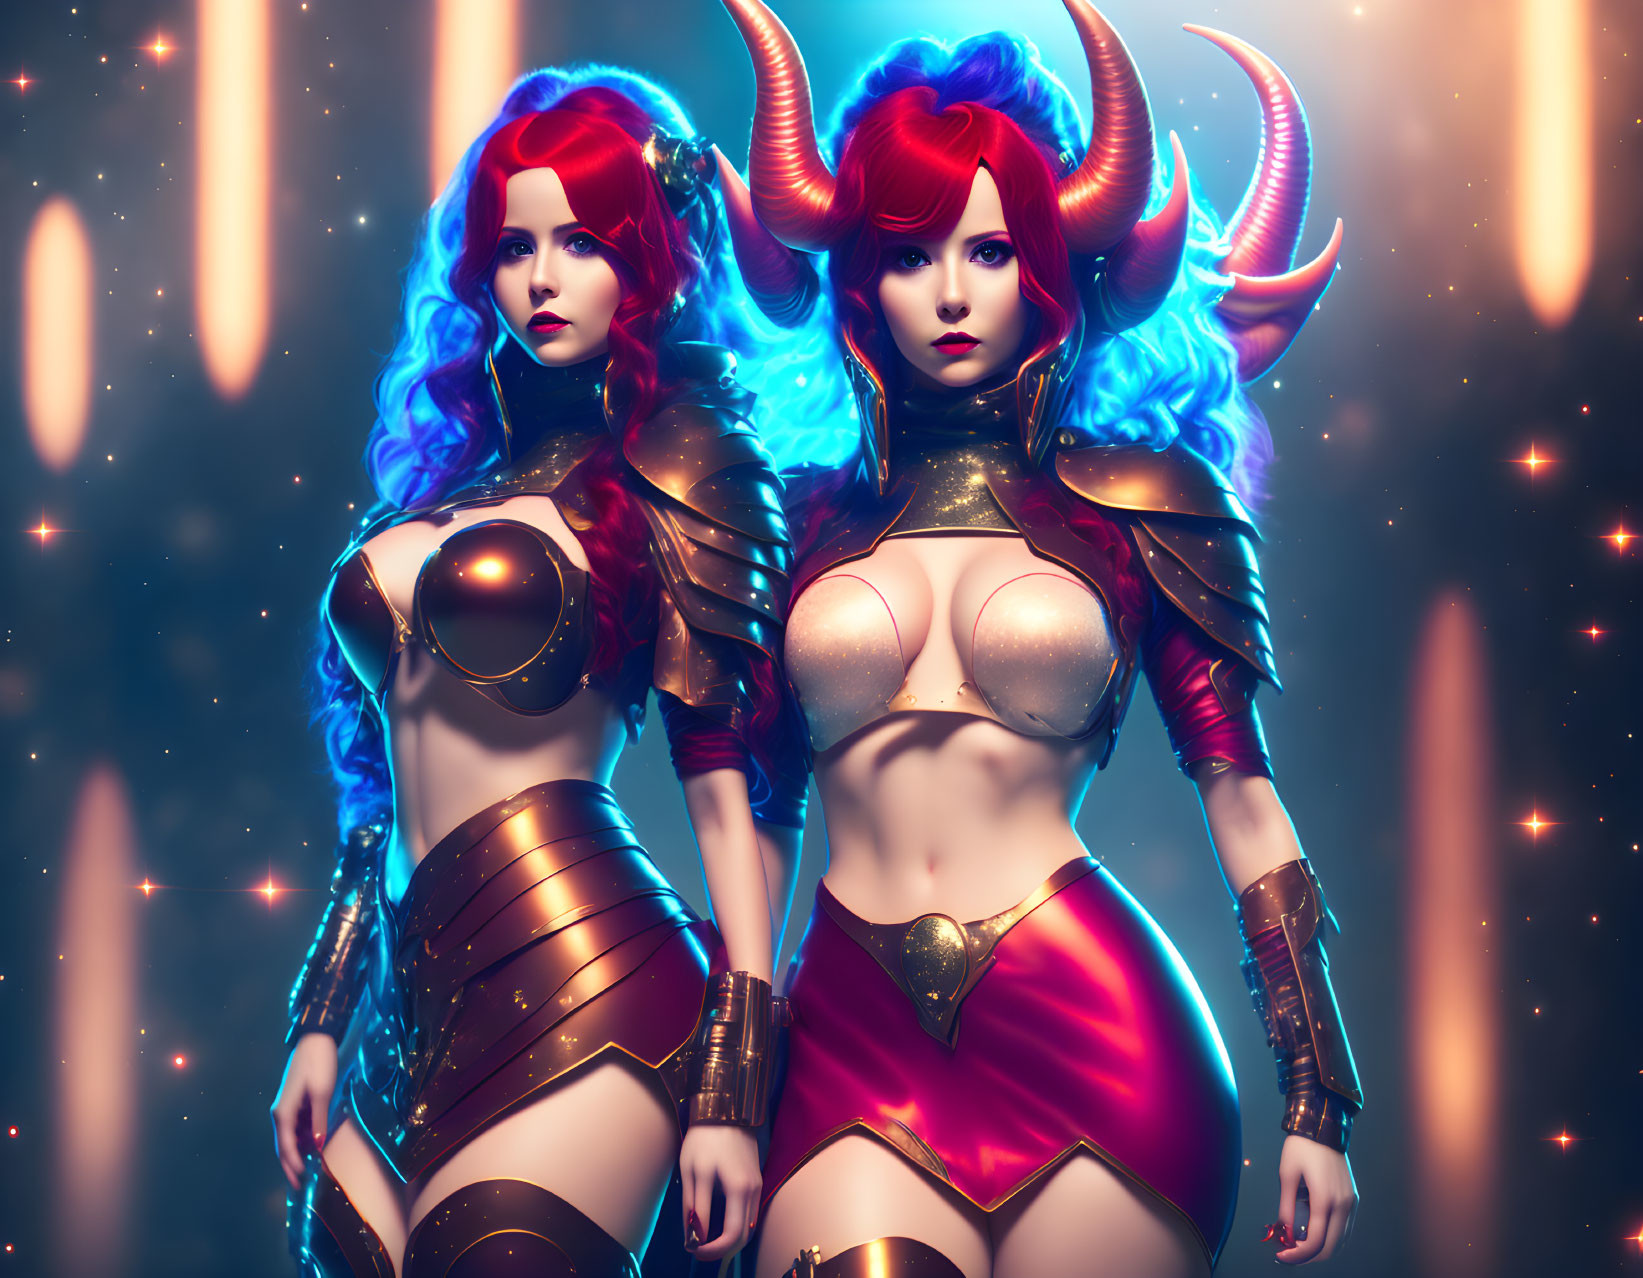 Fantasy female characters with horns and red-blue hair in armored costumes on celestial background